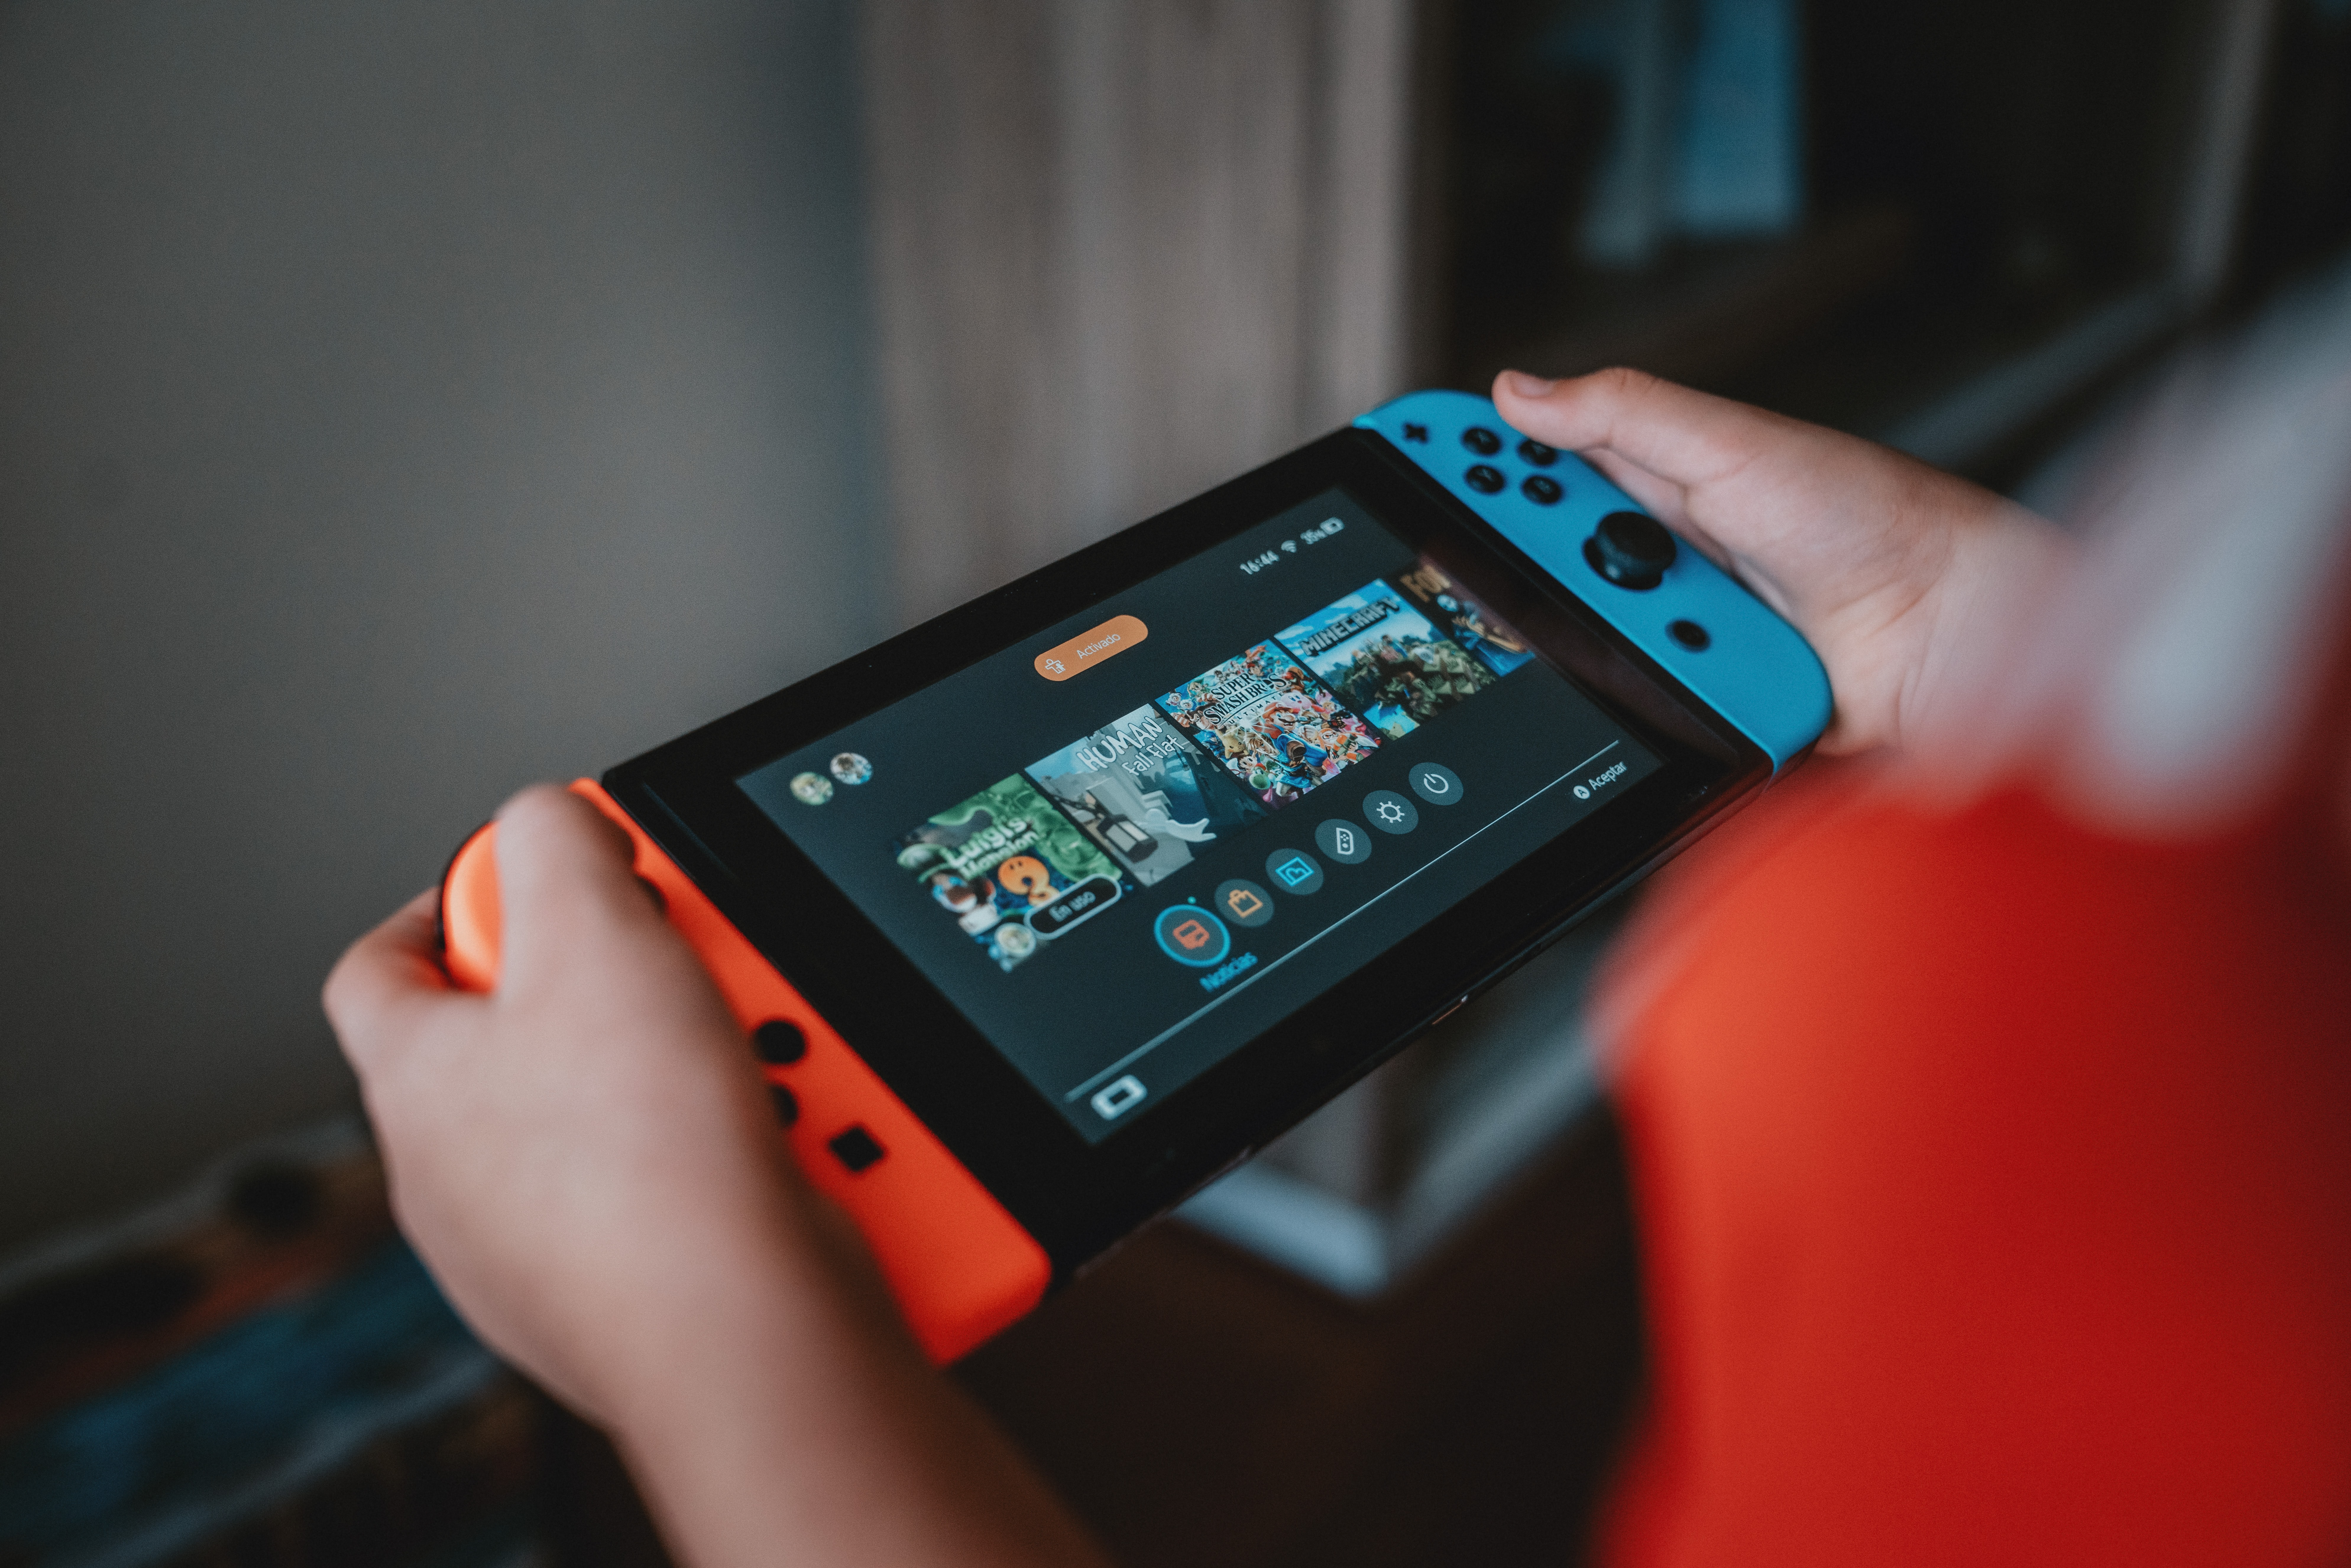 The best Nintendo Switch games to buy in 2023